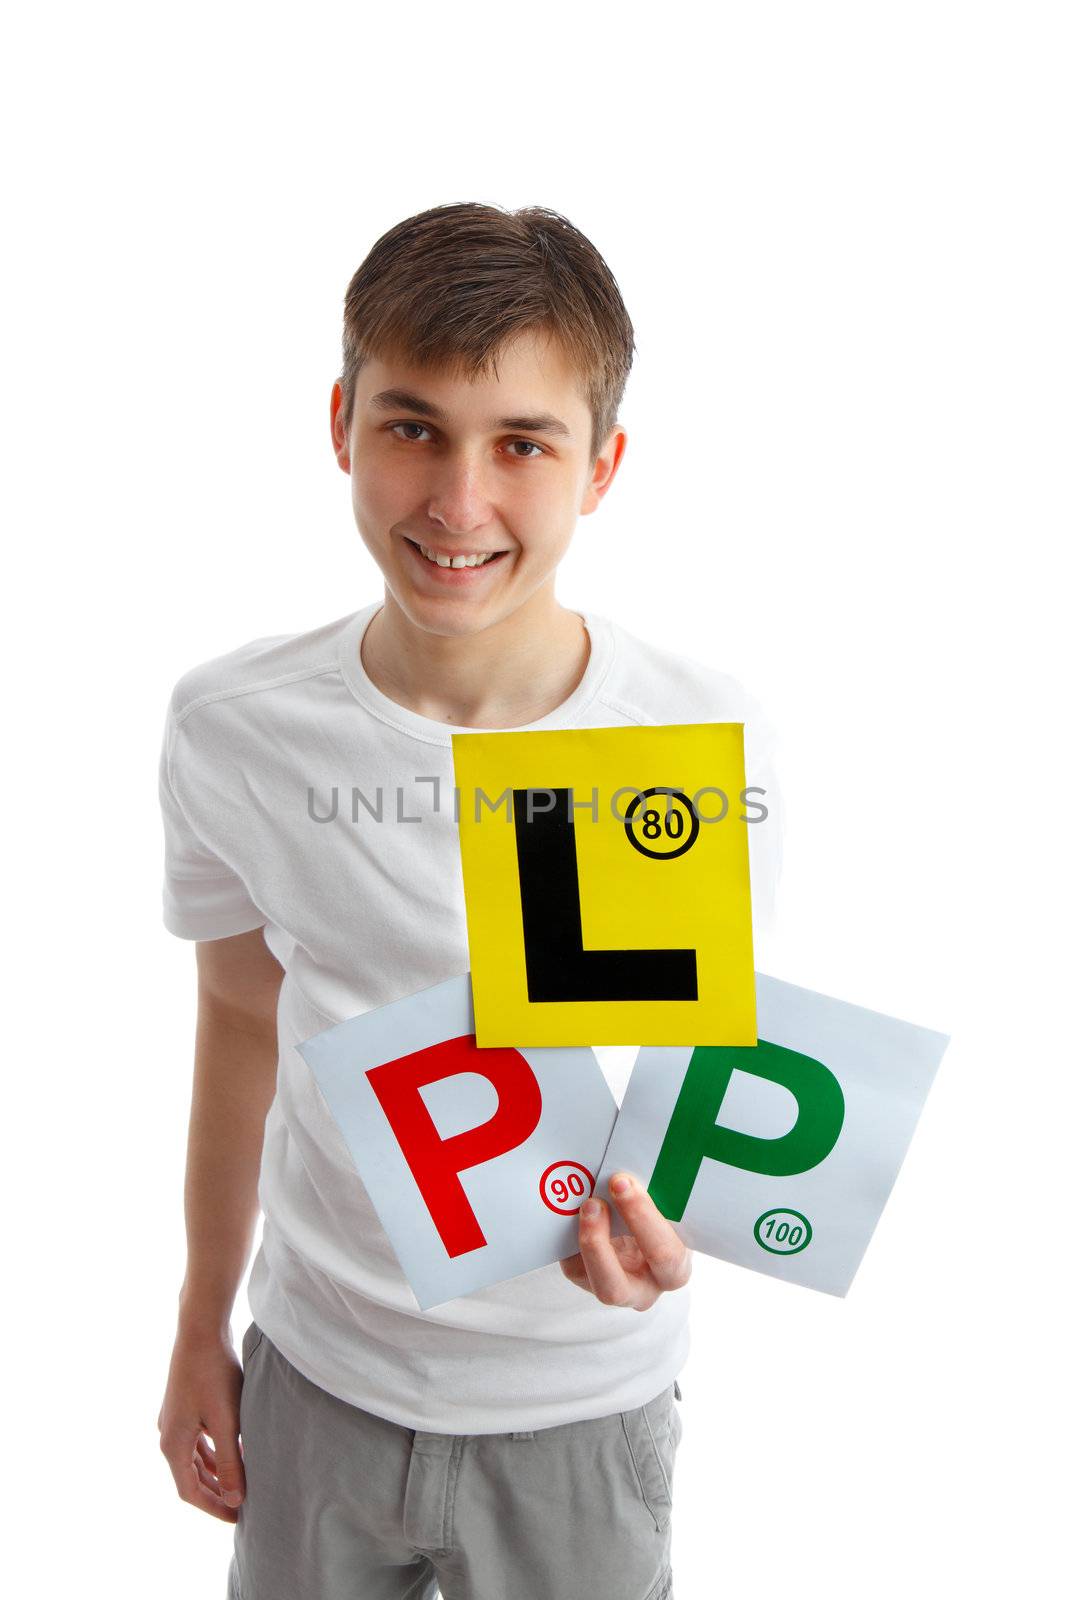 Teen holding magnetic driving licence plates for car by lovleah